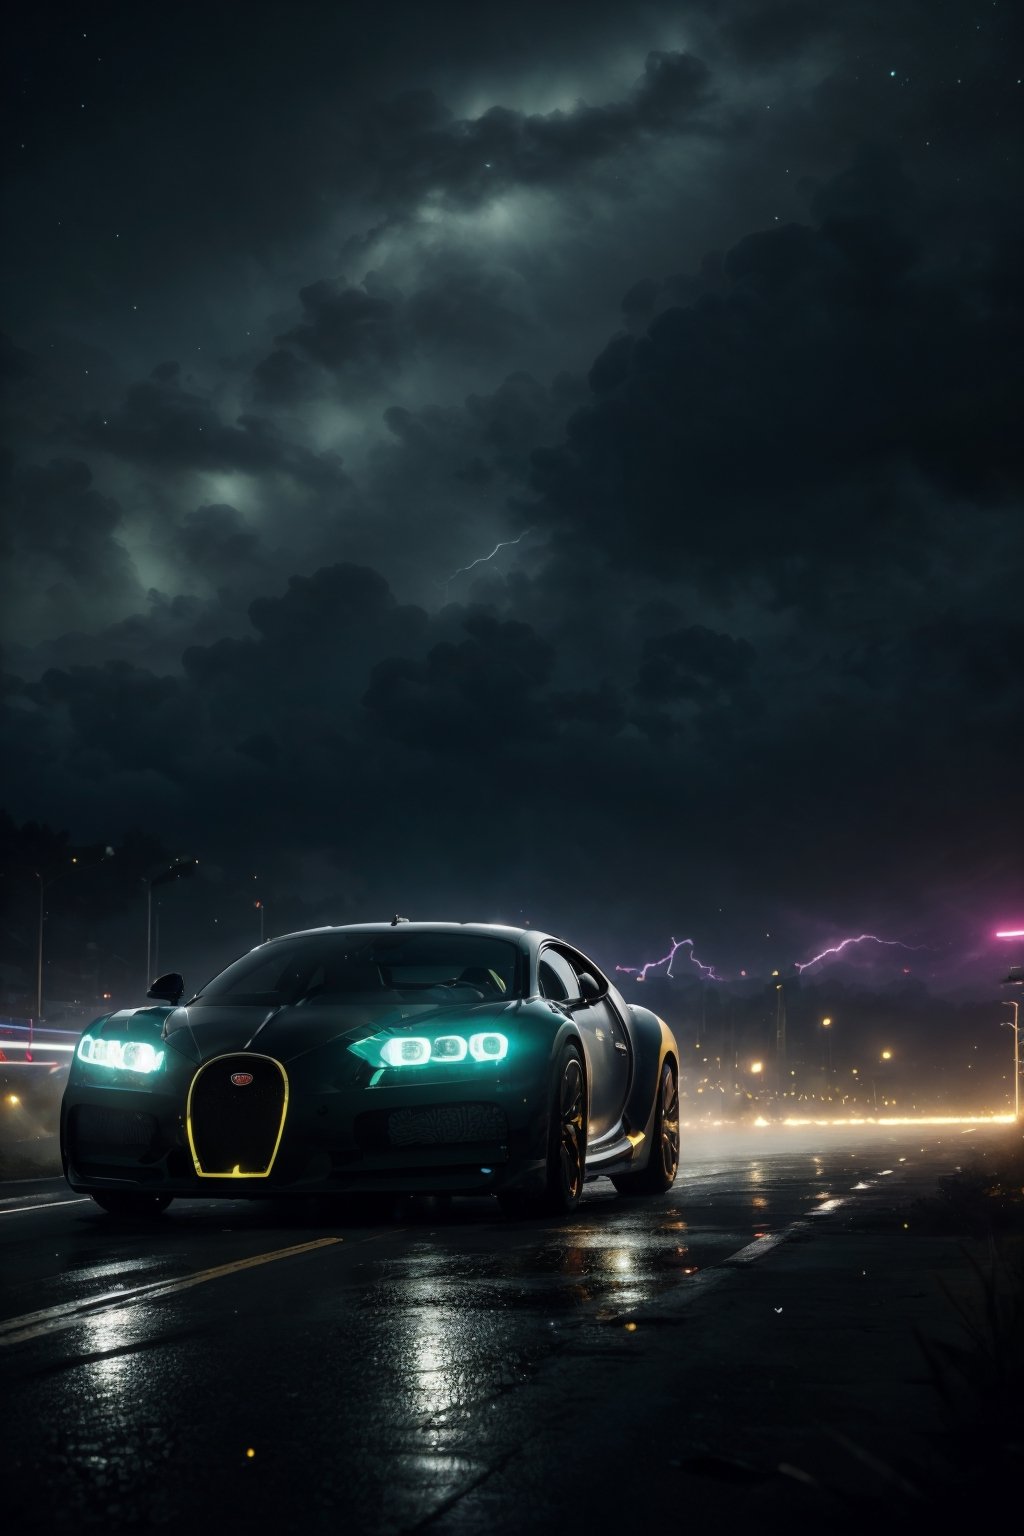 best quality, masterpiece, low angle view. The front shot. Bugatti Chiron alien vision car, a golden car, a colorful car, a legendary car, with turbo. neon ambiance, abstract black oil, gear mecha, detailed acrylic, grunge, intricate complexity, rendered in unreal engine, photorealistic, ultra highly detailed, cinematic, Super various sport luxury cars, in dark racing red speeds along a night track, headlight beams piercing the darkness toward distant lights. fast, high speed, high detailed, 16k, while driving, lightning, electrical, technical, adrenaline-fuelled, dynamic angles and intense lighting. (((parallax motion blur))), ((ultra-detailed details))) high-speed excitement, dutch angle view from in front, ultra hd, realistic, vivid colors, highly detailed, UHD drawing, perfect composition, ultra hd, 8k, he has an inner glow, stunning, something that even doesn't exist, mythical being, energy, molecular, textures, iridescent and luminescent scales, breathtaking beauty, pure perfection, divine presence, unforgettable, impressive, breathtaking beauty, Volumetric light, auras, rays, vivid colors reflects.,Cyberpunk,photorealistic,firefliesfireflies